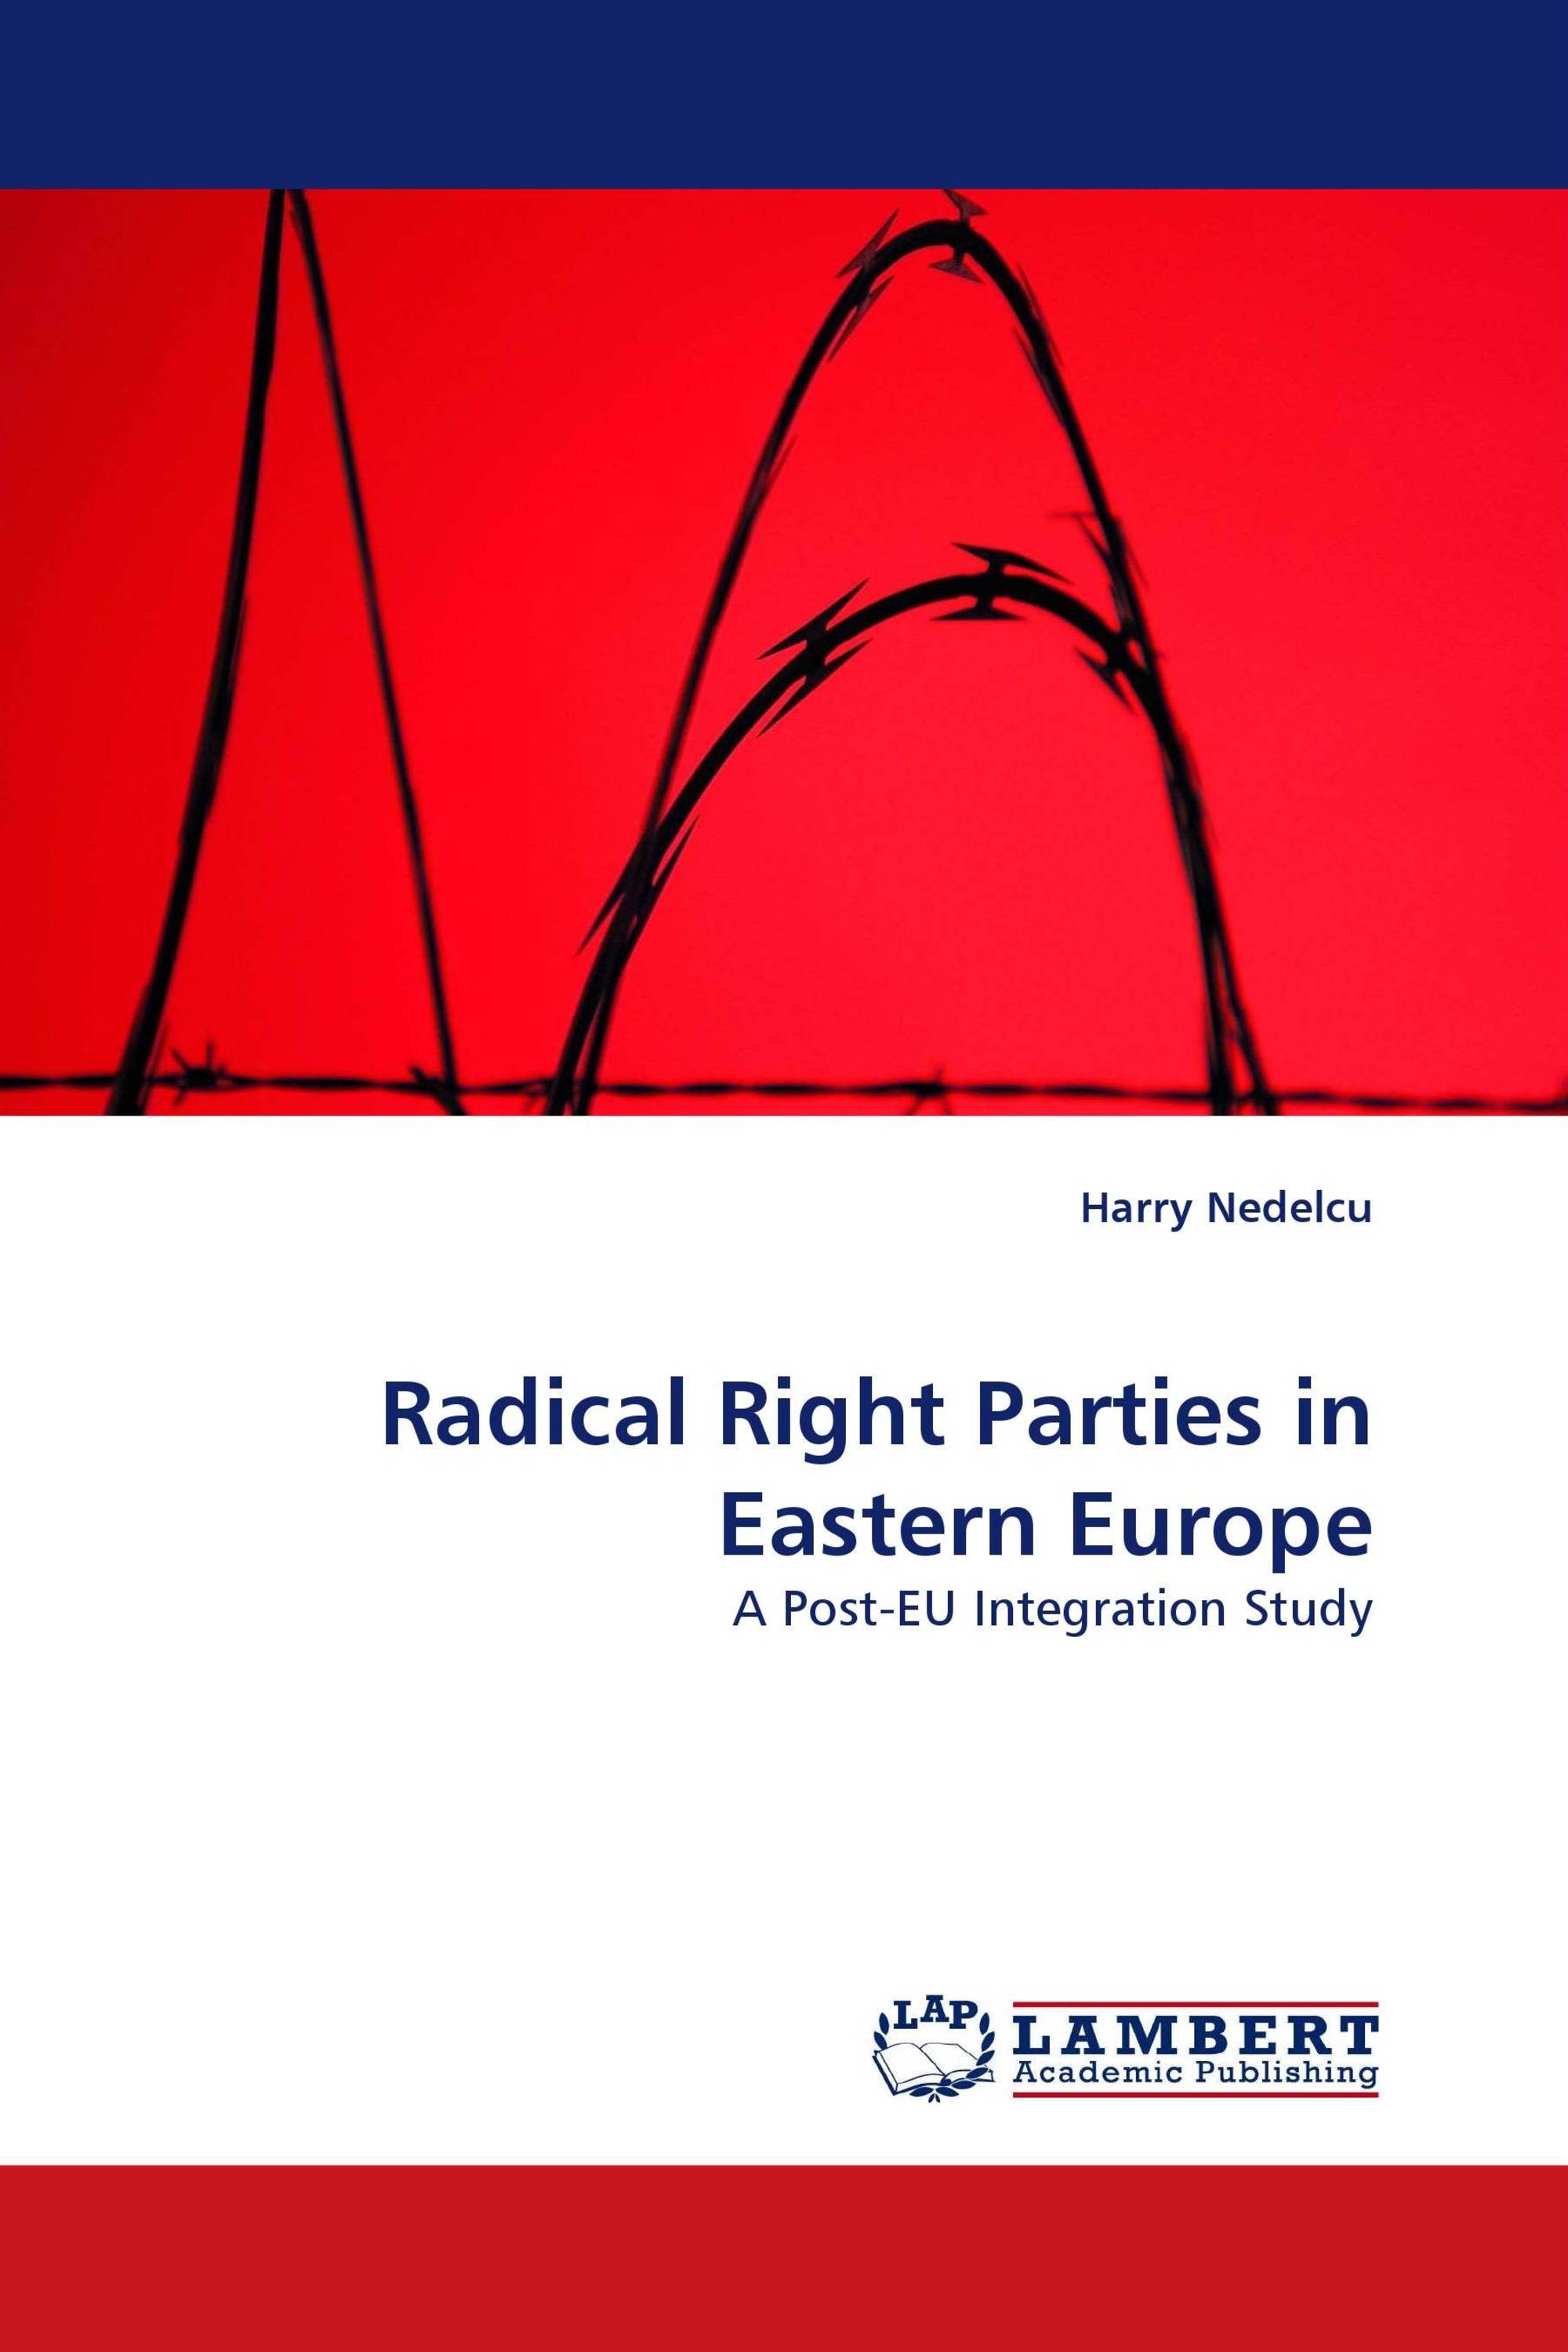 Radical Right Parties in Eastern Europe